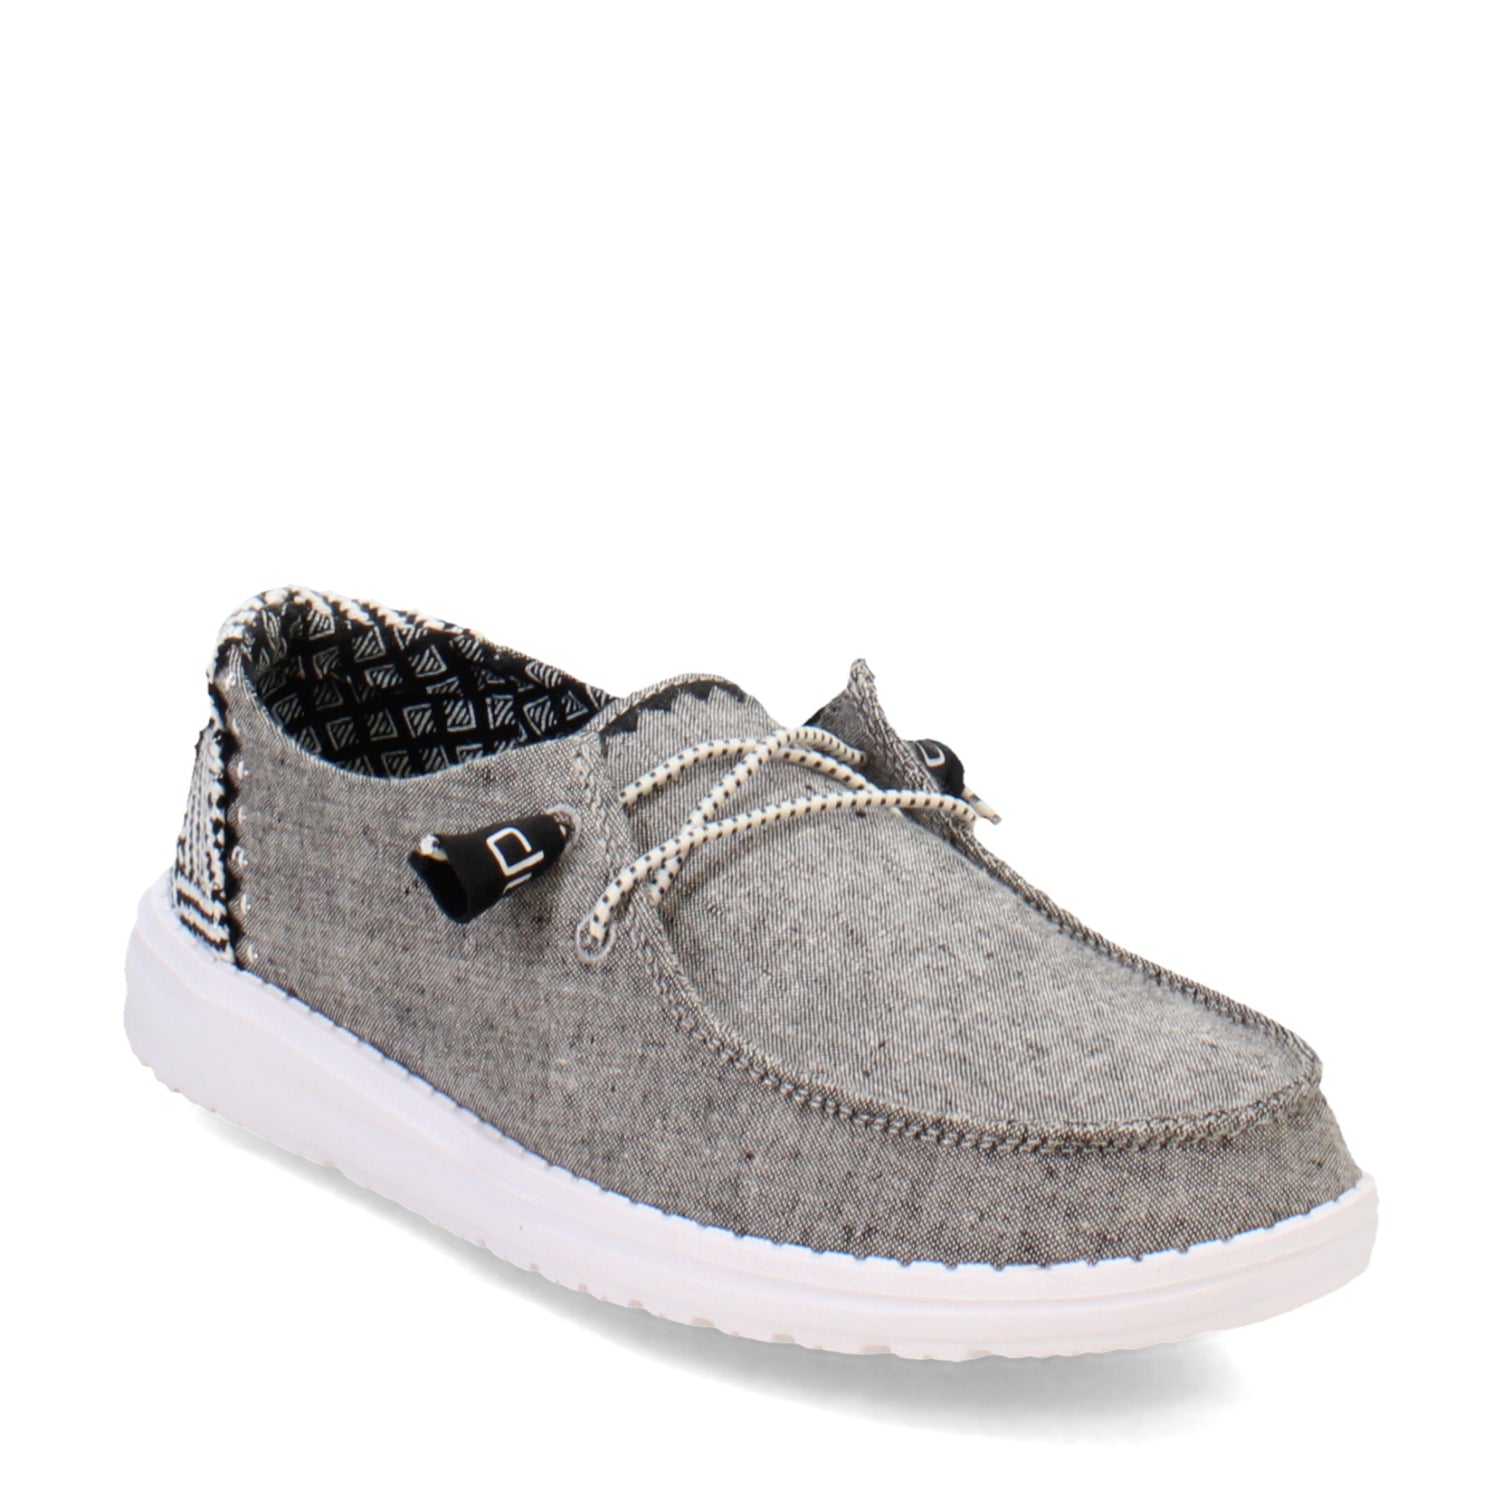 Hey Dude Cody Craft Linen, Womens Slip on Casual Shoes